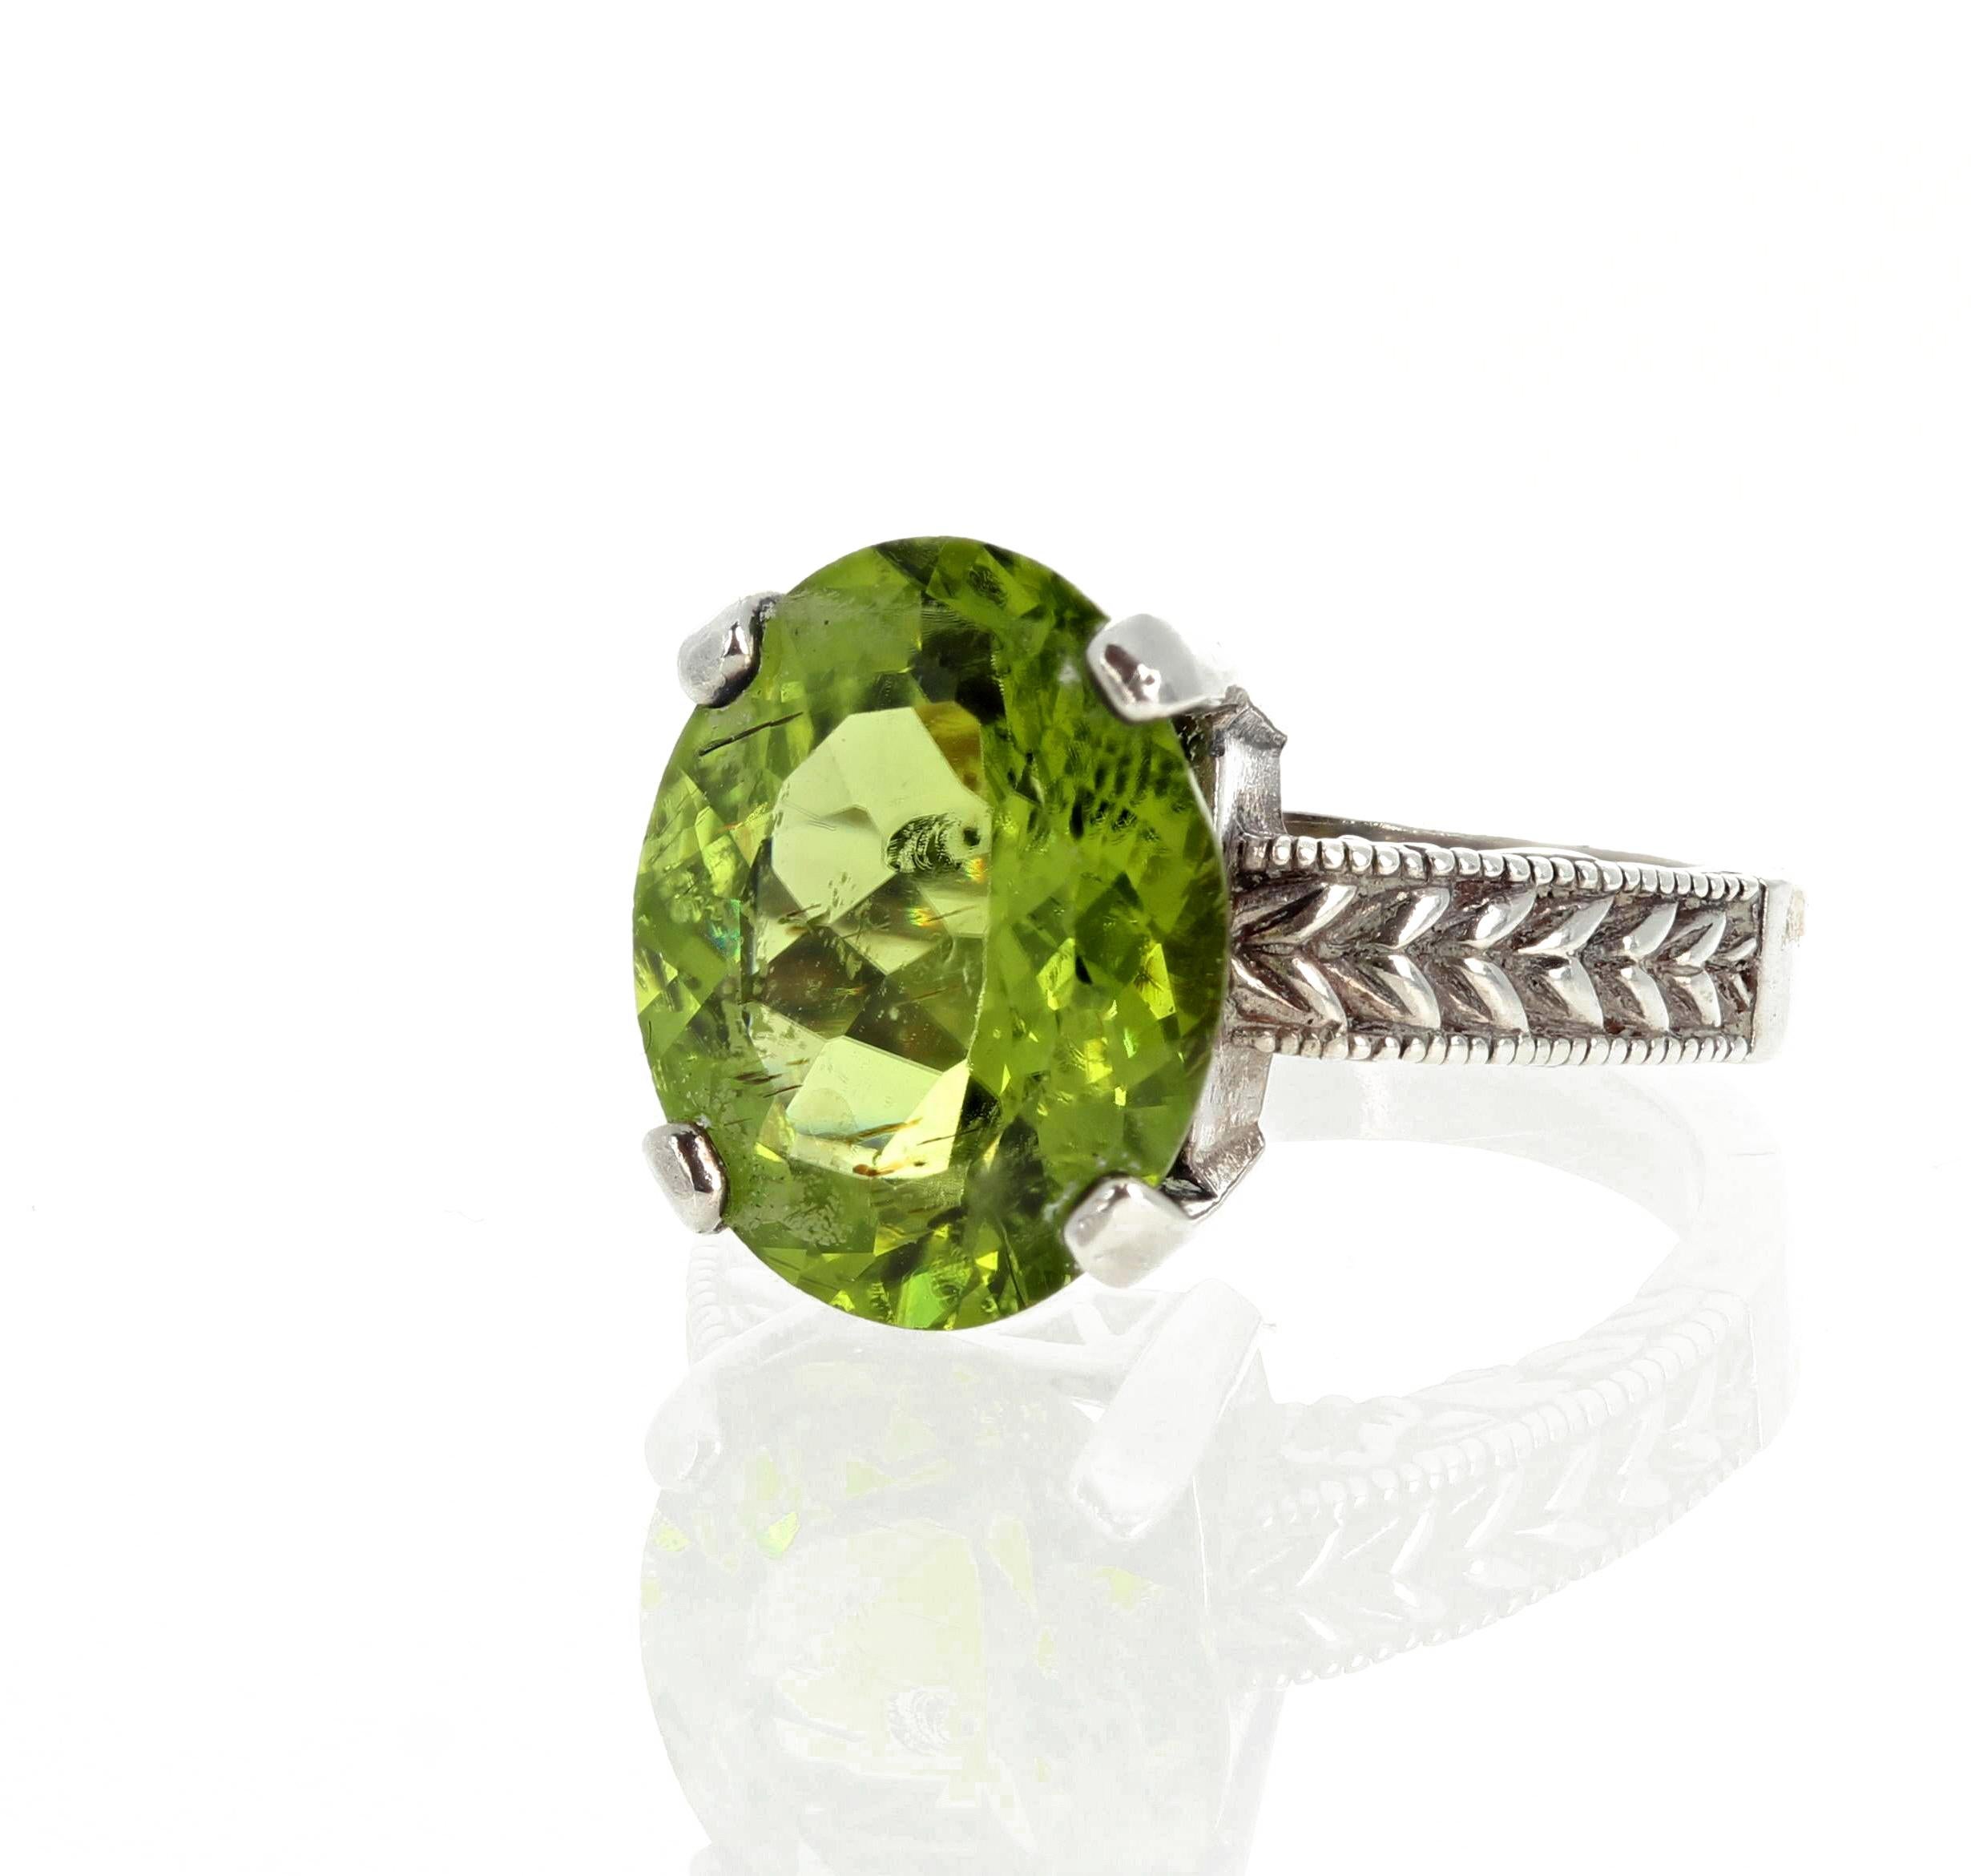 Beautiful glittering 7.43 carat Peridot (15mm x 12mm) set in a sterling silver ring size 7 (sizable).  Spectacular optical effect in the Peridot exhibits goldygreen reflections and fire highlights in spectral green colors and makes the gemstone